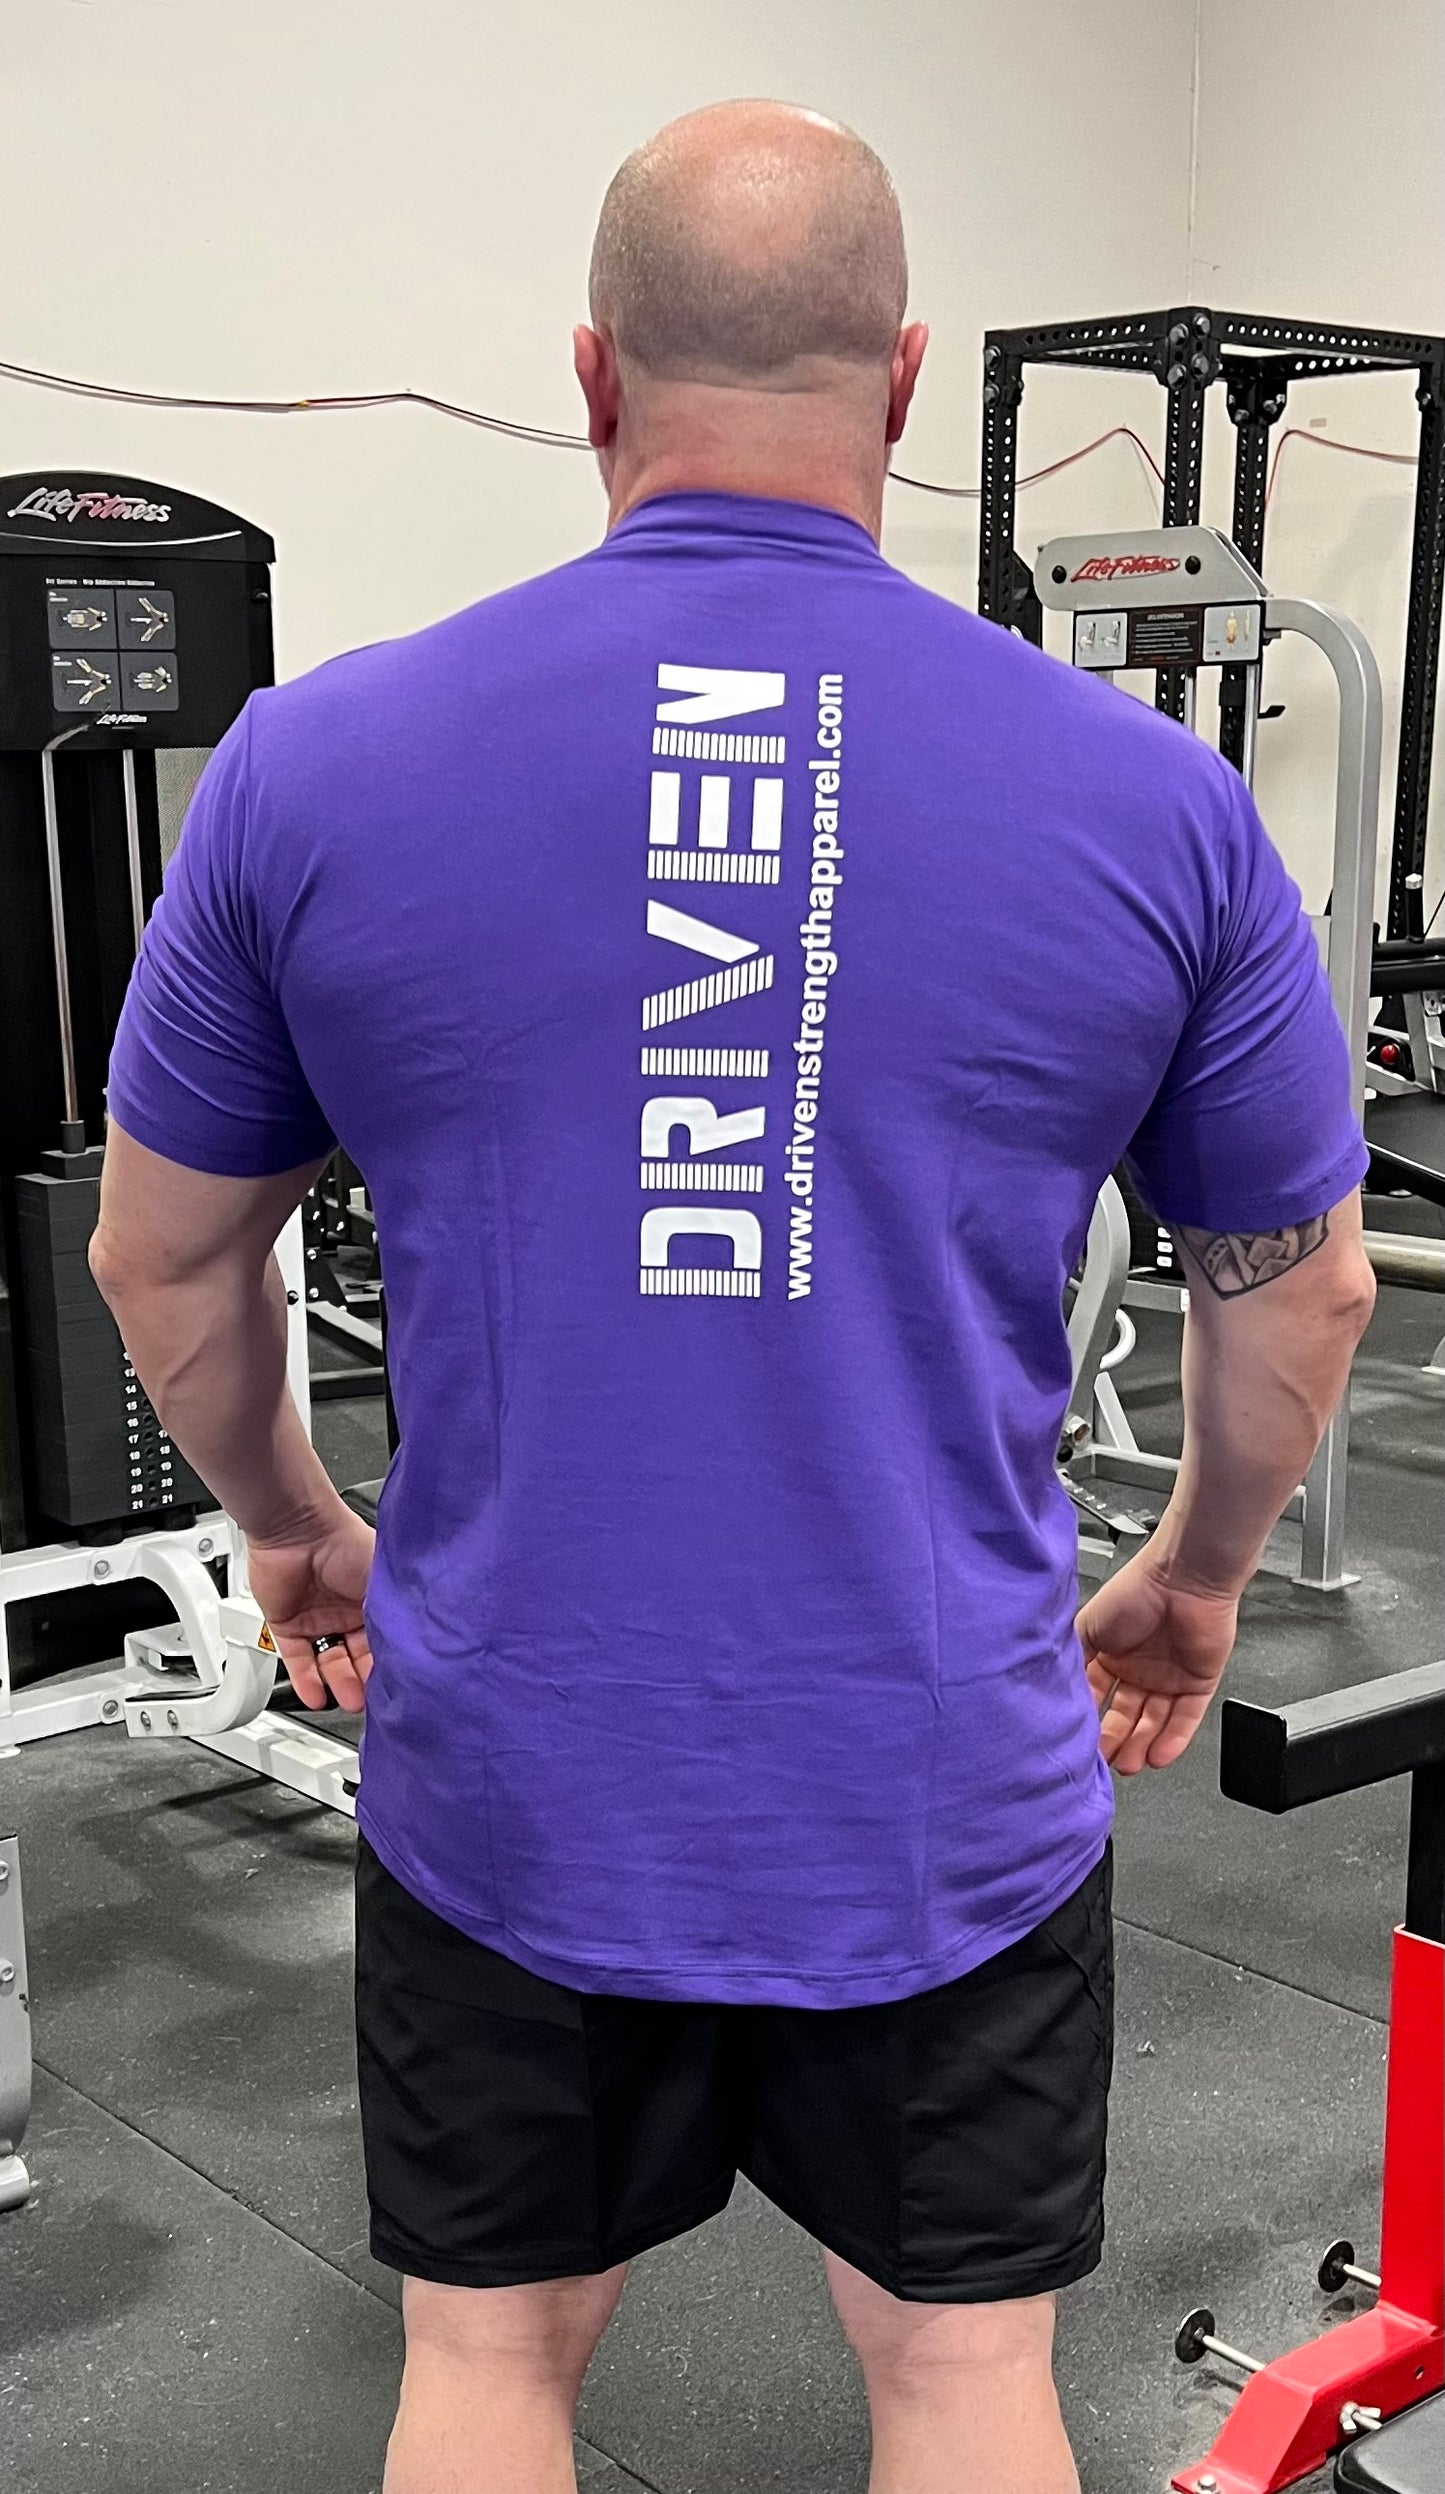 DRIVEN - T Shirts Muscle Fit "Ain't Training For Second Place" **SALE**